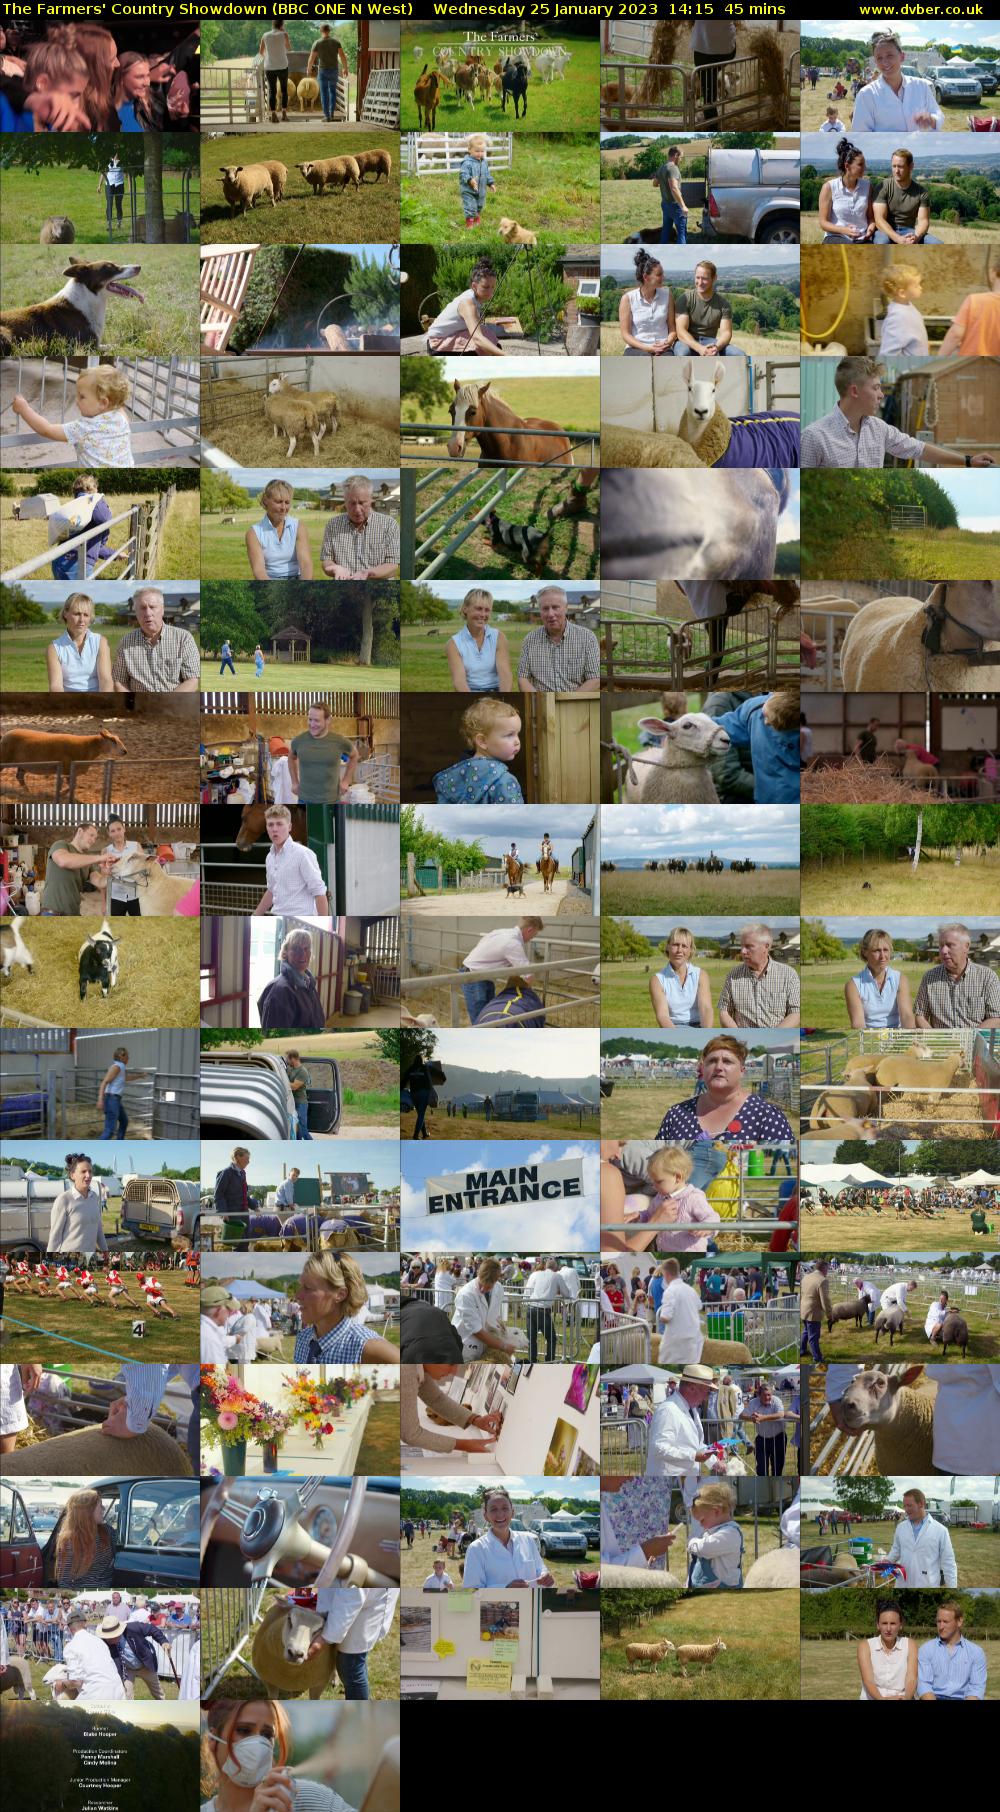 The Farmers' Country Showdown (BBC ONE N West) Wednesday 25 January 2023 14:15 - 15:00